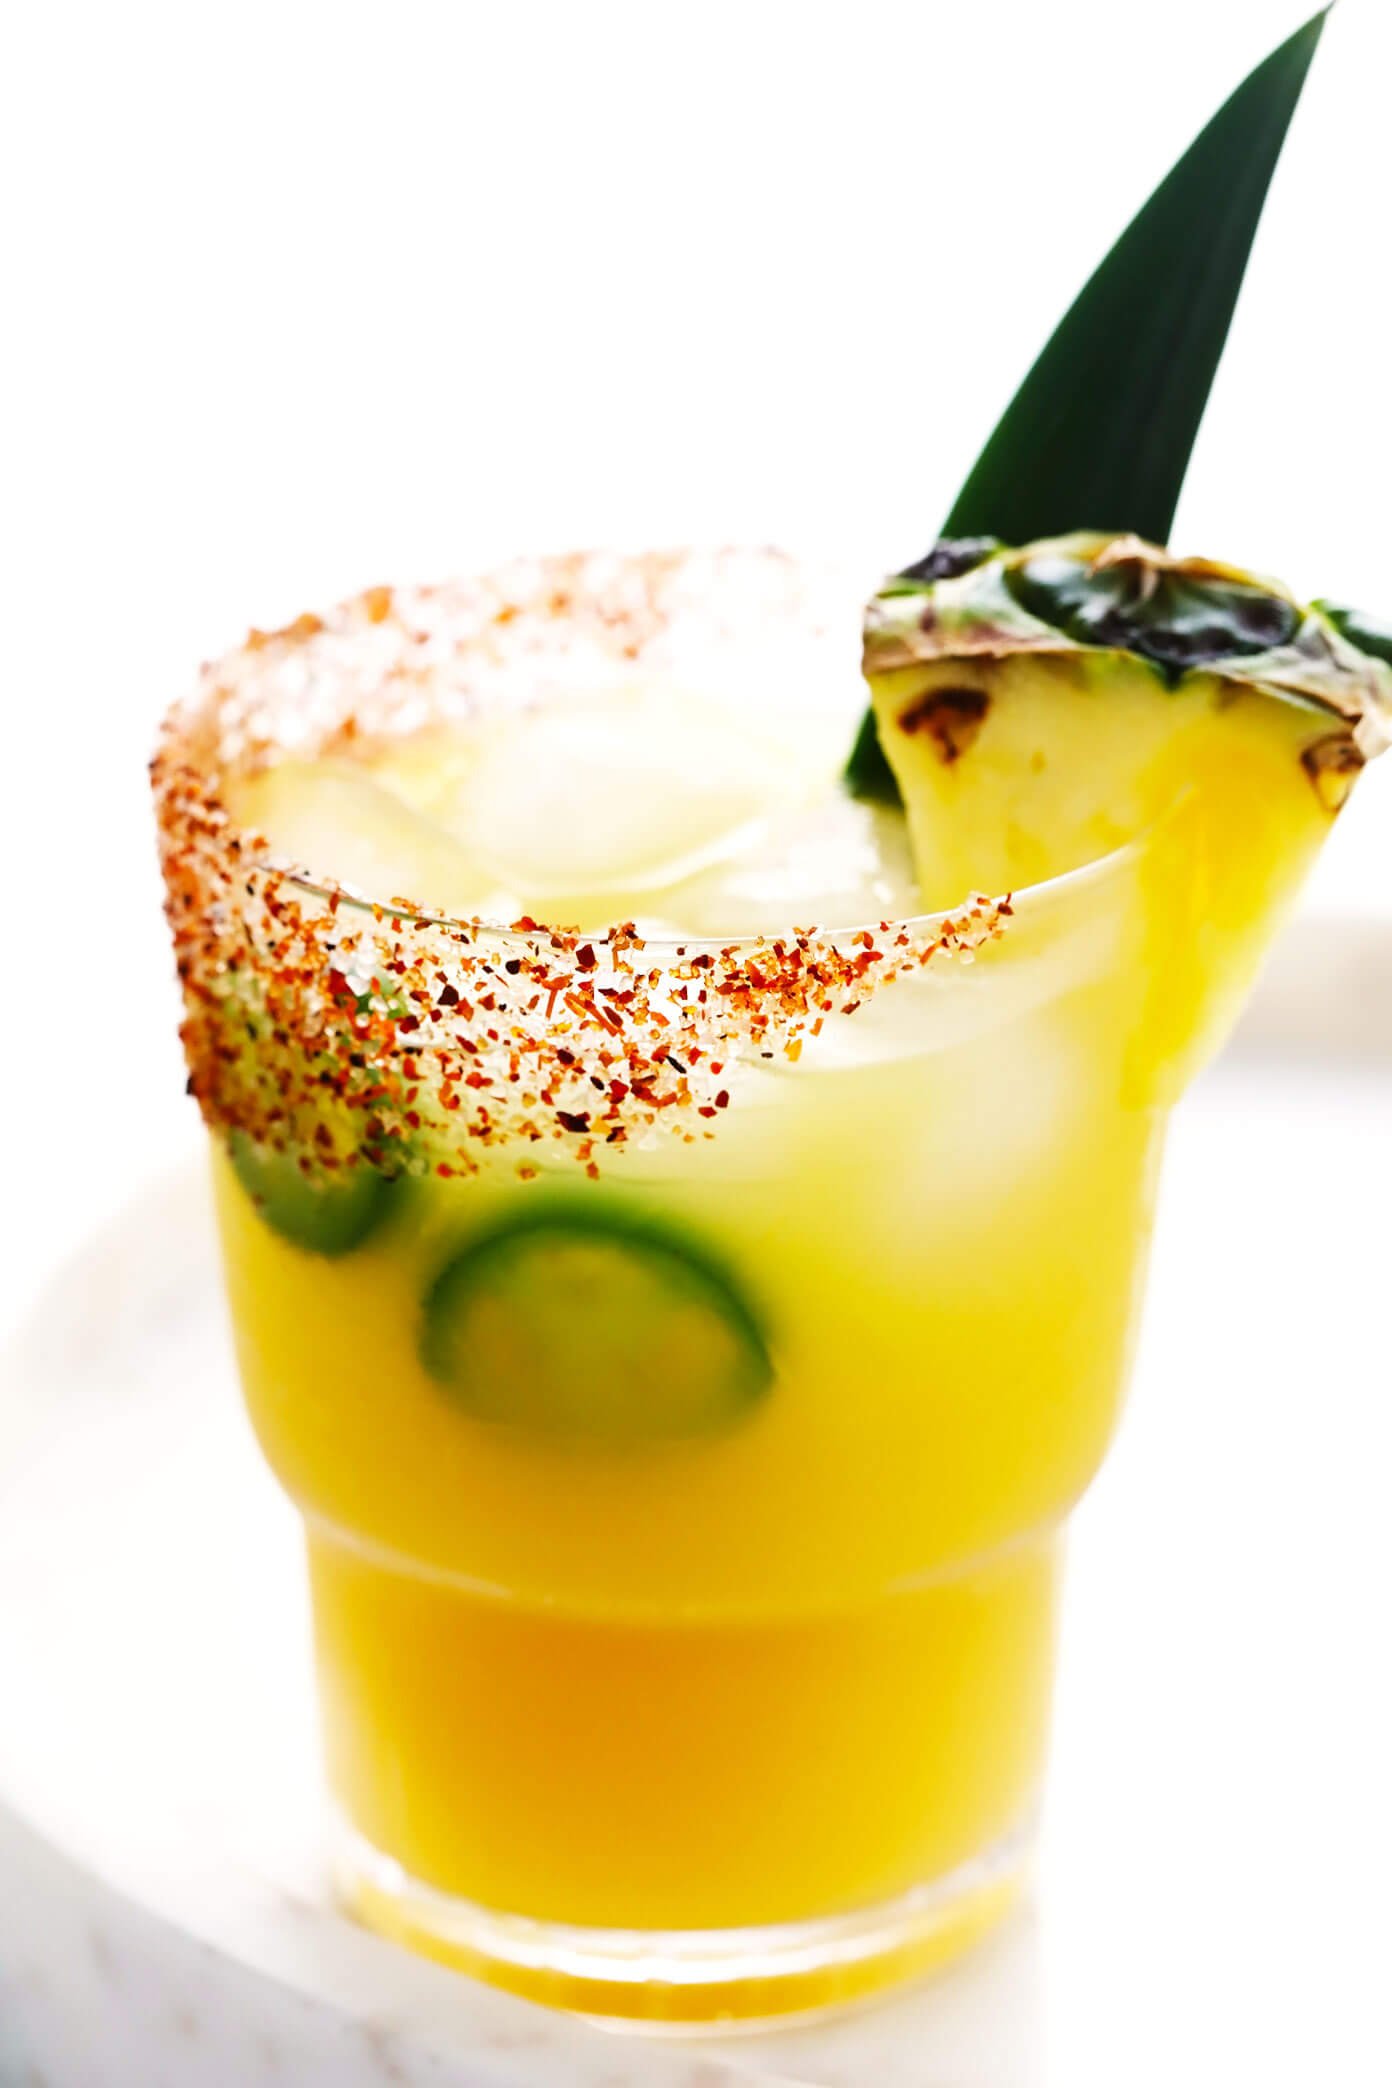 Spicy Pineapple Margarita with Jalapeño in Glass